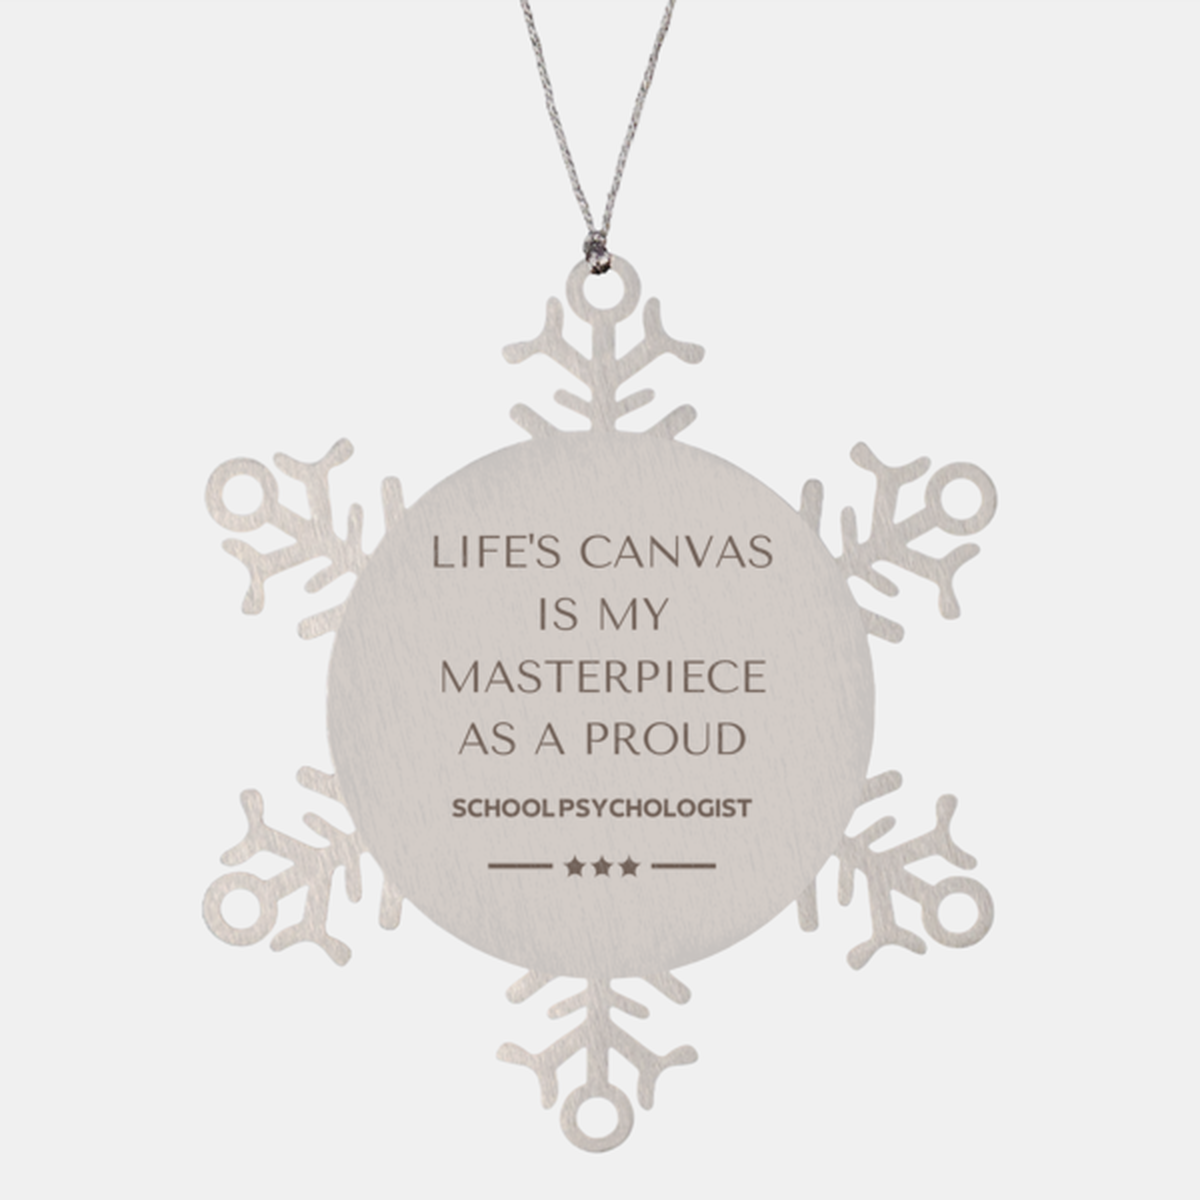 Proud School Psychologist Gifts, Life's canvas is my masterpiece, Epic Birthday Christmas Unique Snowflake Ornament For School Psychologist, Coworkers, Men, Women, Friends